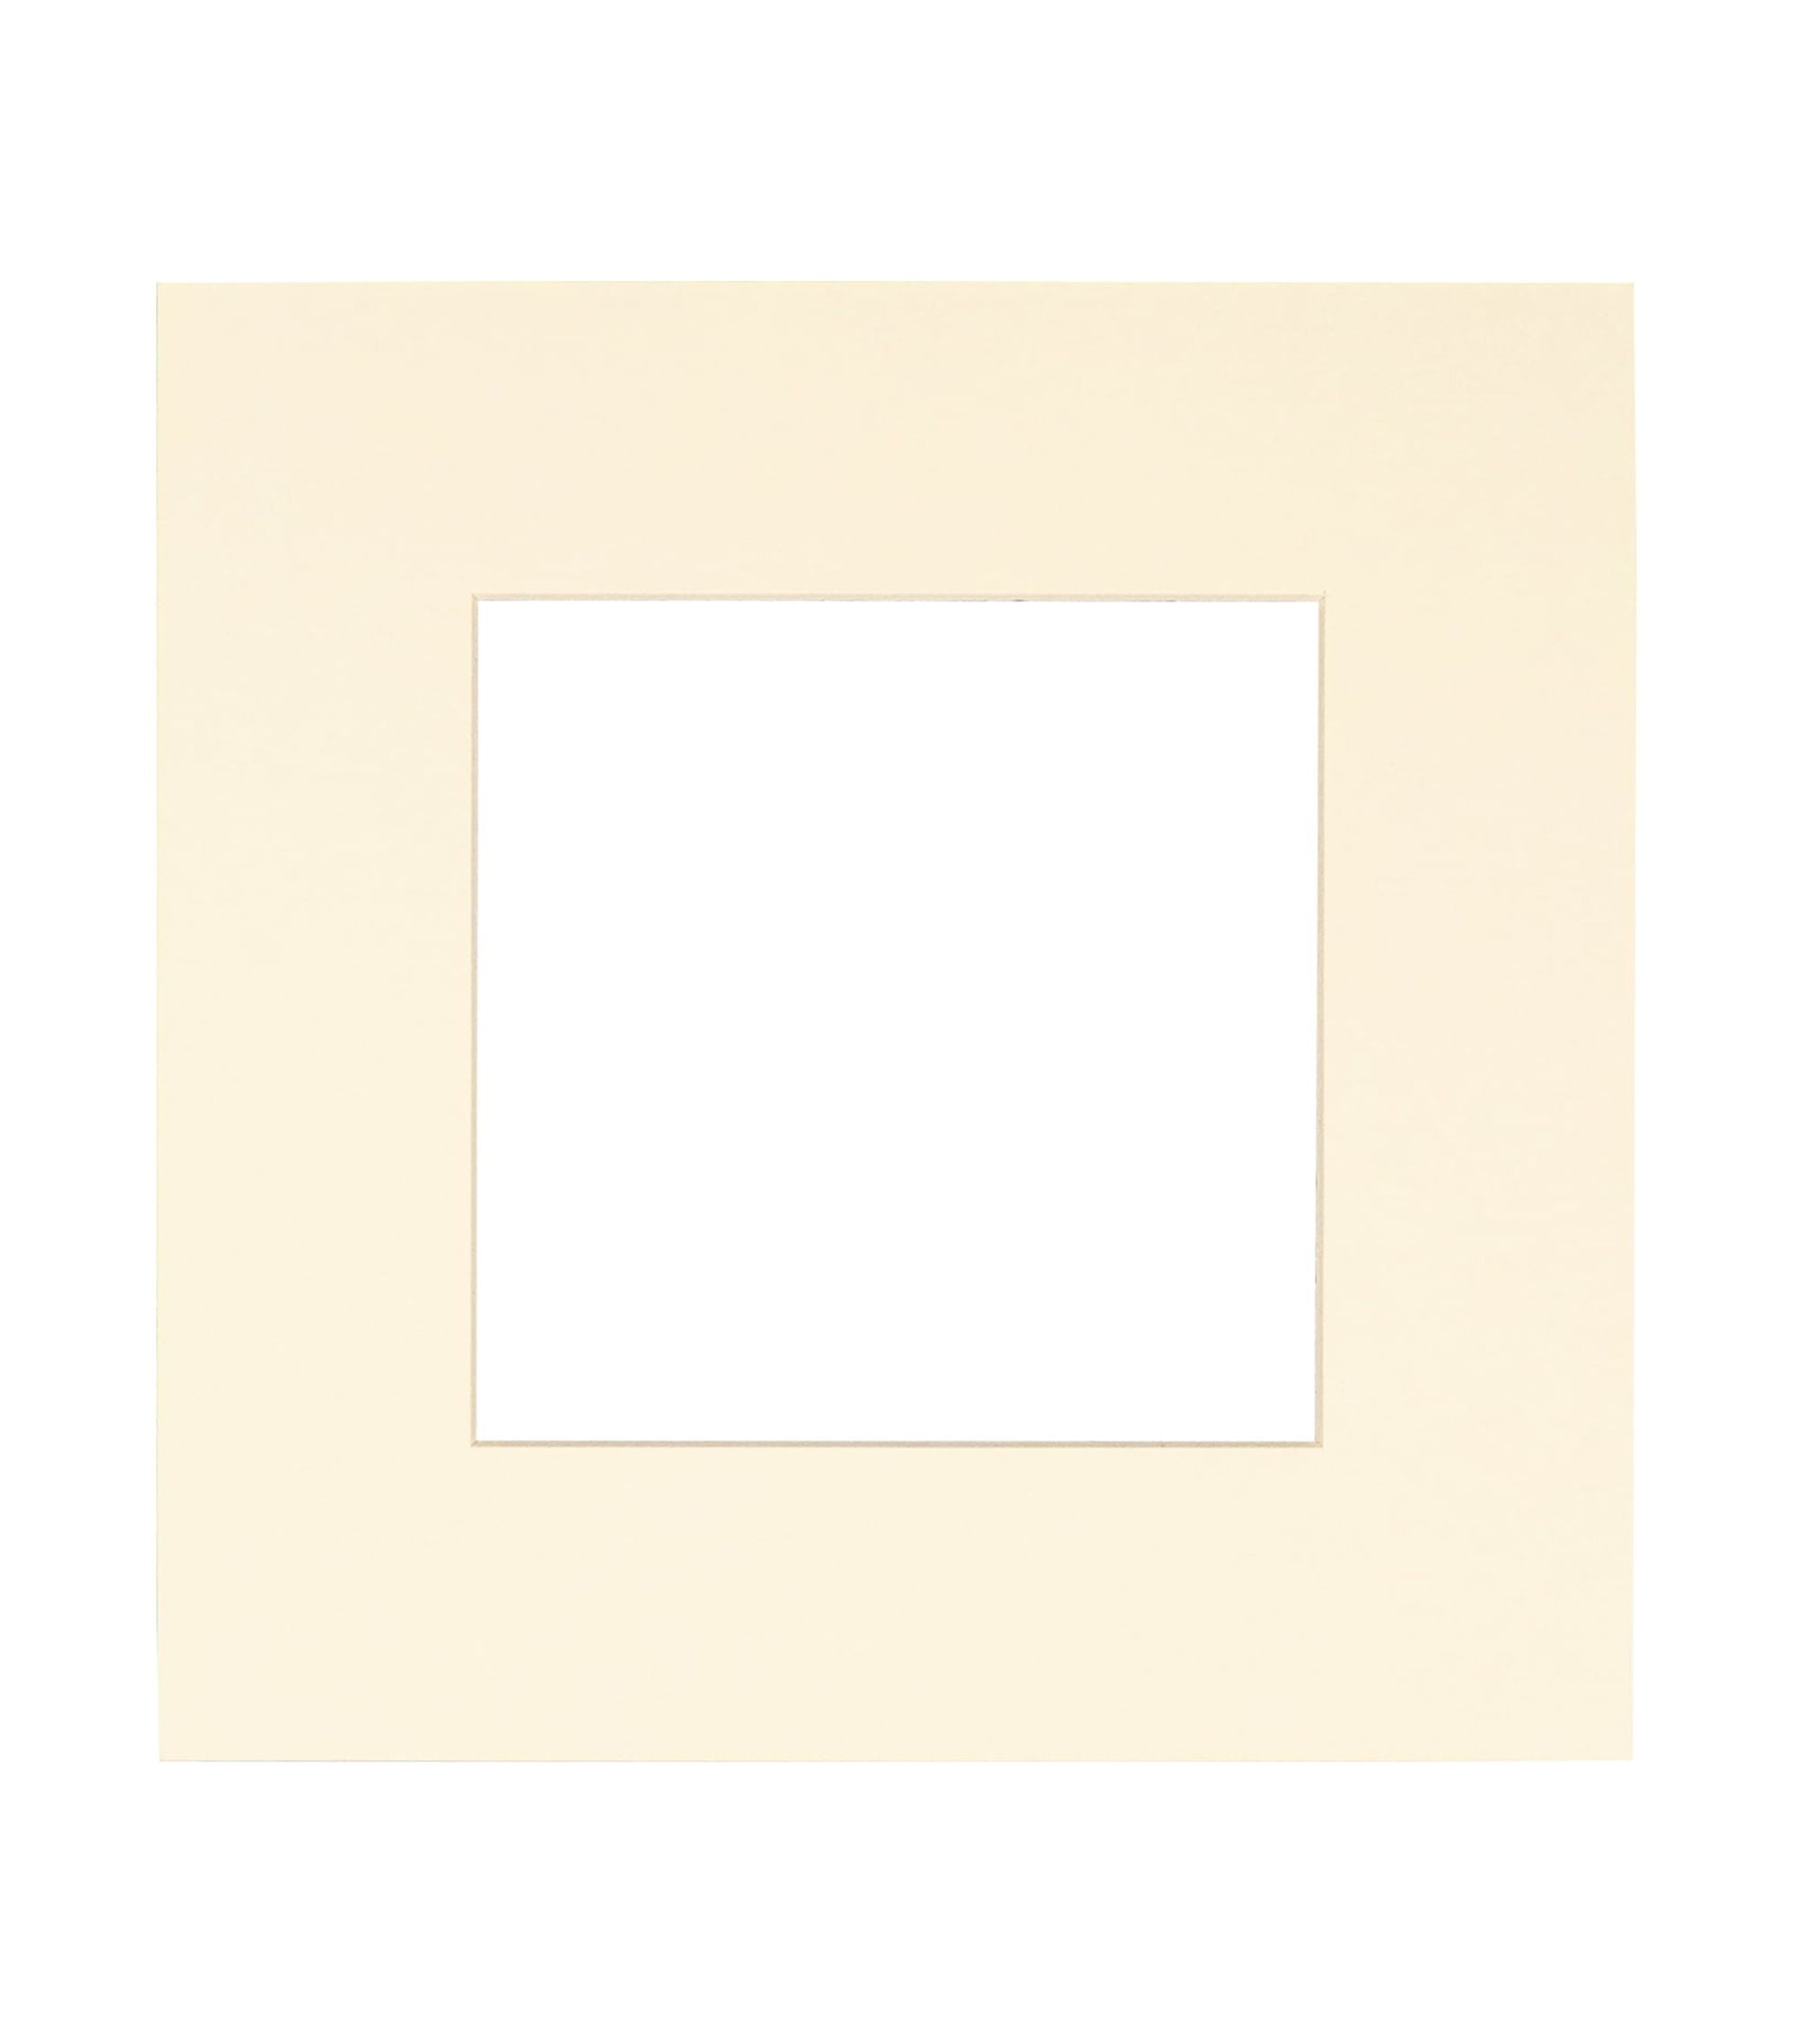  8x10 Mat for 12x16 Frame - Precut Mat Board Acid-Free Show Kit  with Backing Board, and Clear Bags White 8x10 Photo Matte Made to Fit a  12x16 Picture Frame Matboard for